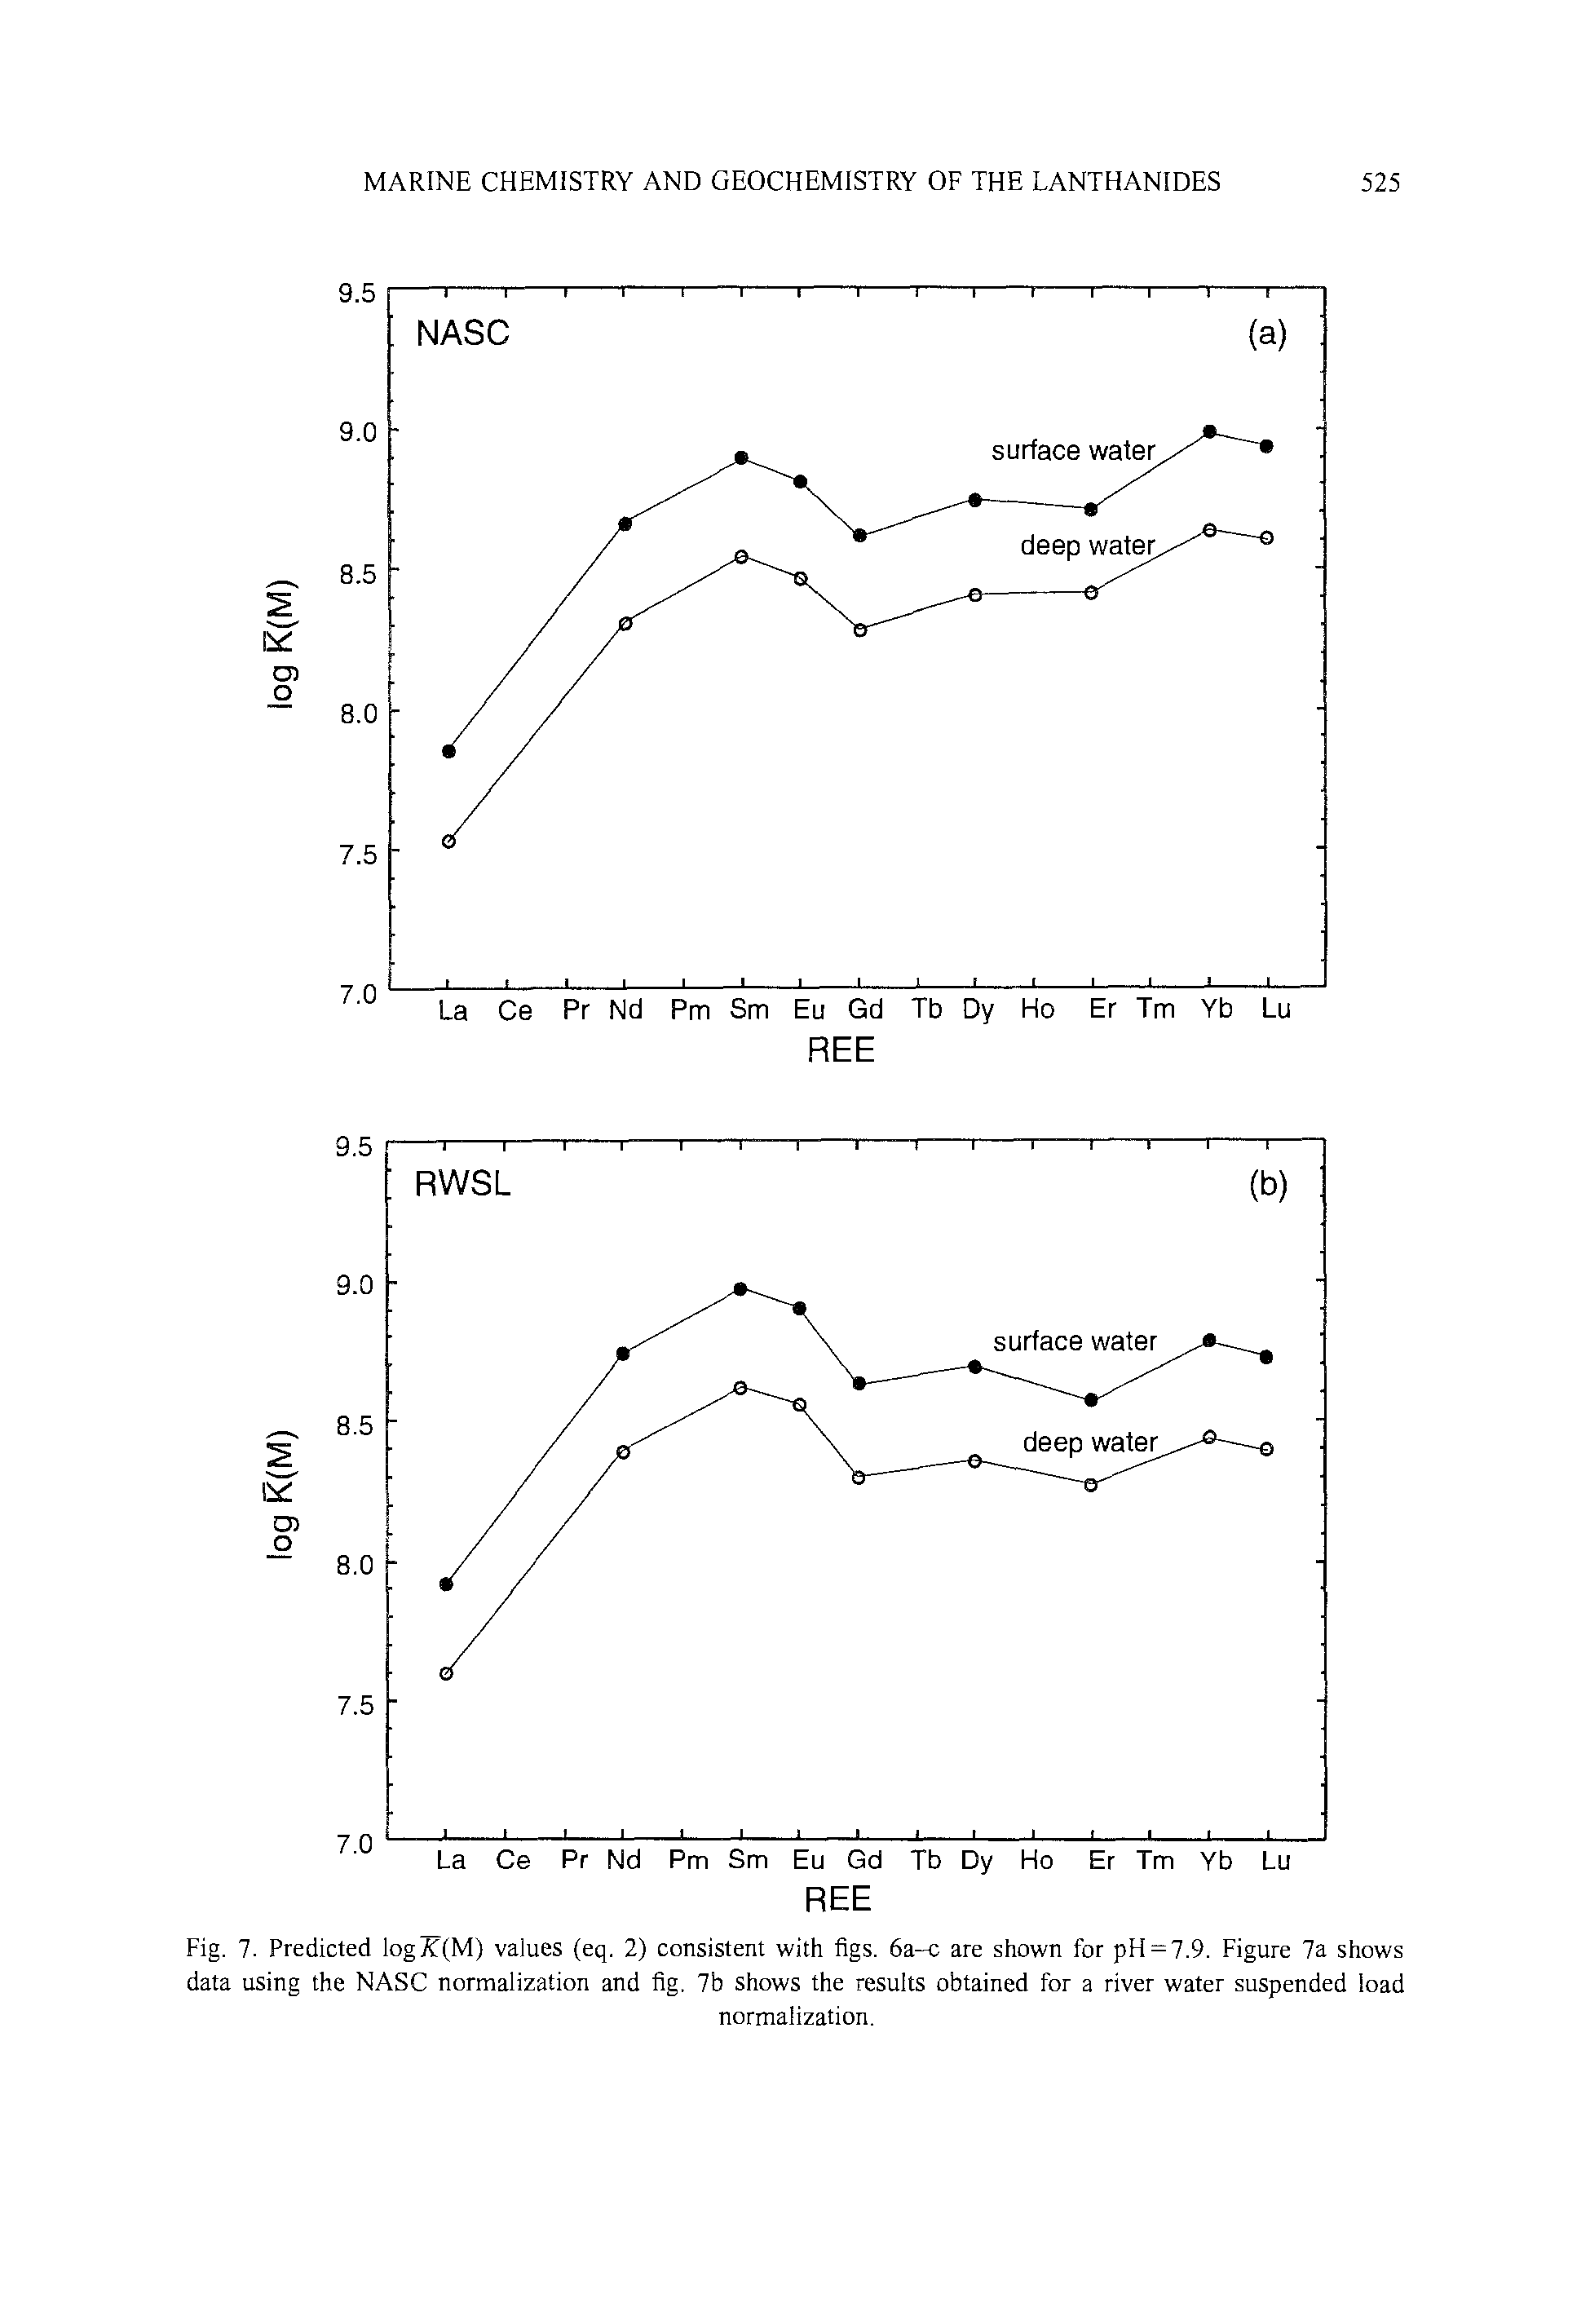 Fig. 7. Predicted log7f(M) values (eq. 2) consistent with figs. 6a-c are shown for pH = 7.9. Figure 7a shows data using the NASC normalization and fig. 7b shows the results obtained for a river water suspended load...